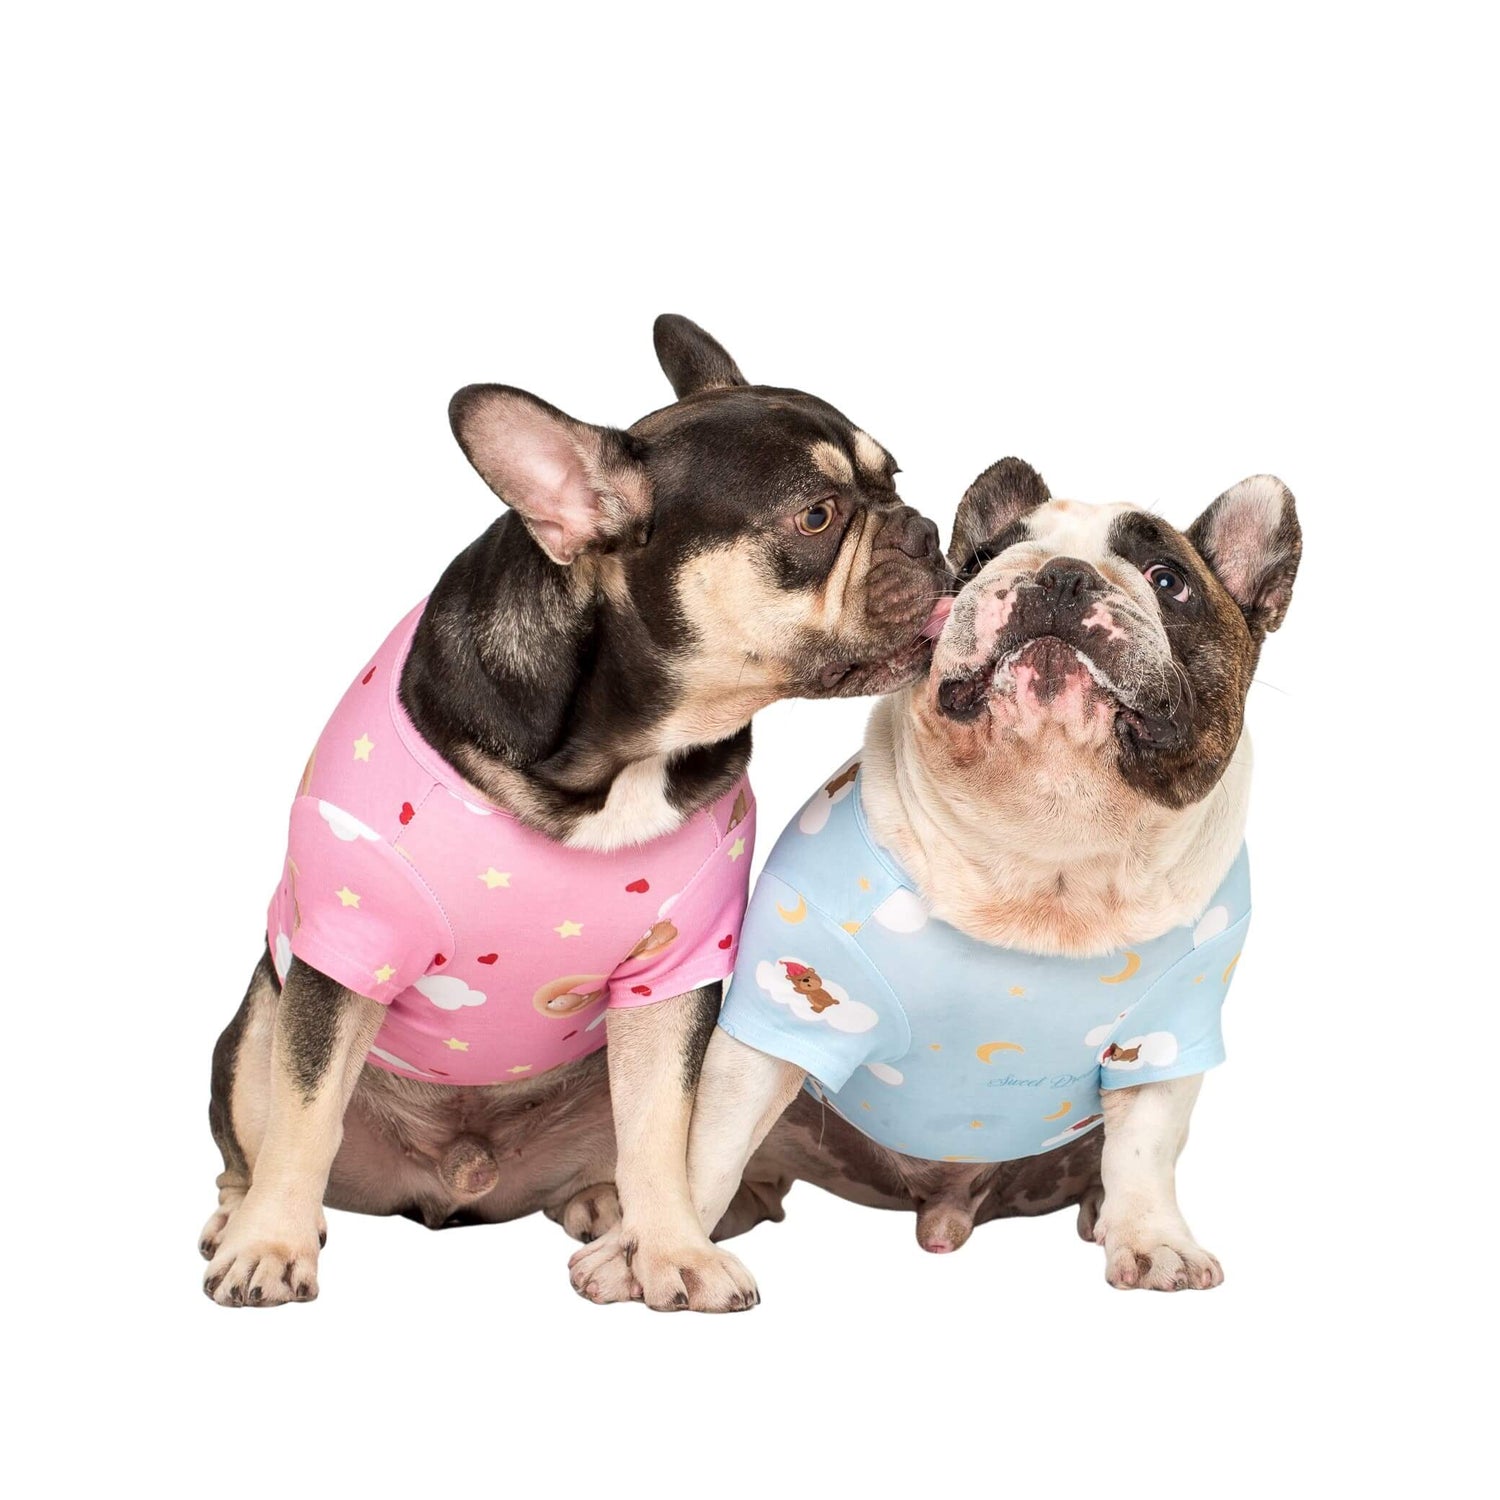 Two French Bulldogs weraring Vibrant Hound Little dreamer - Blue sleep pyjamas for dogs.